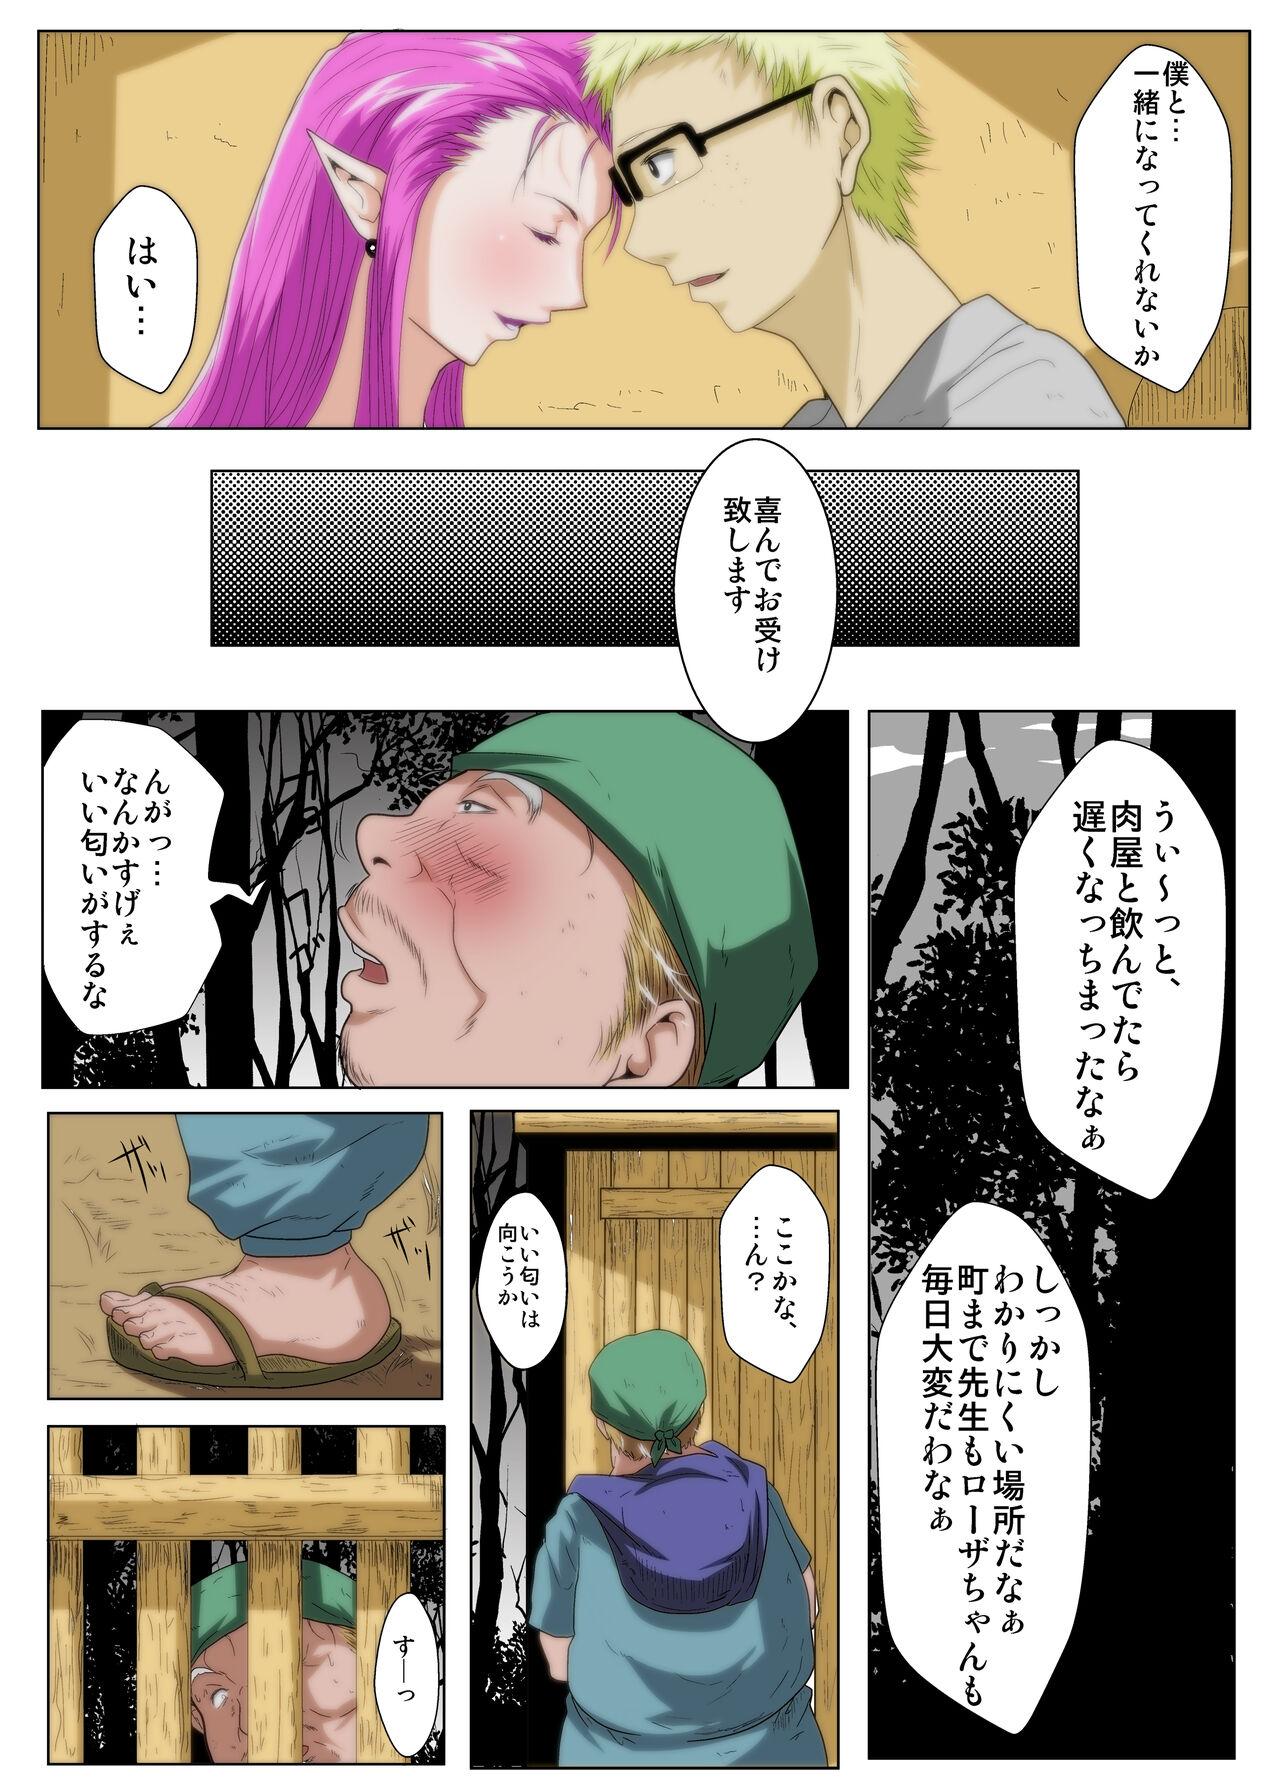 Bisex 僕の∞みんなの彼女 Longhair - Page 6